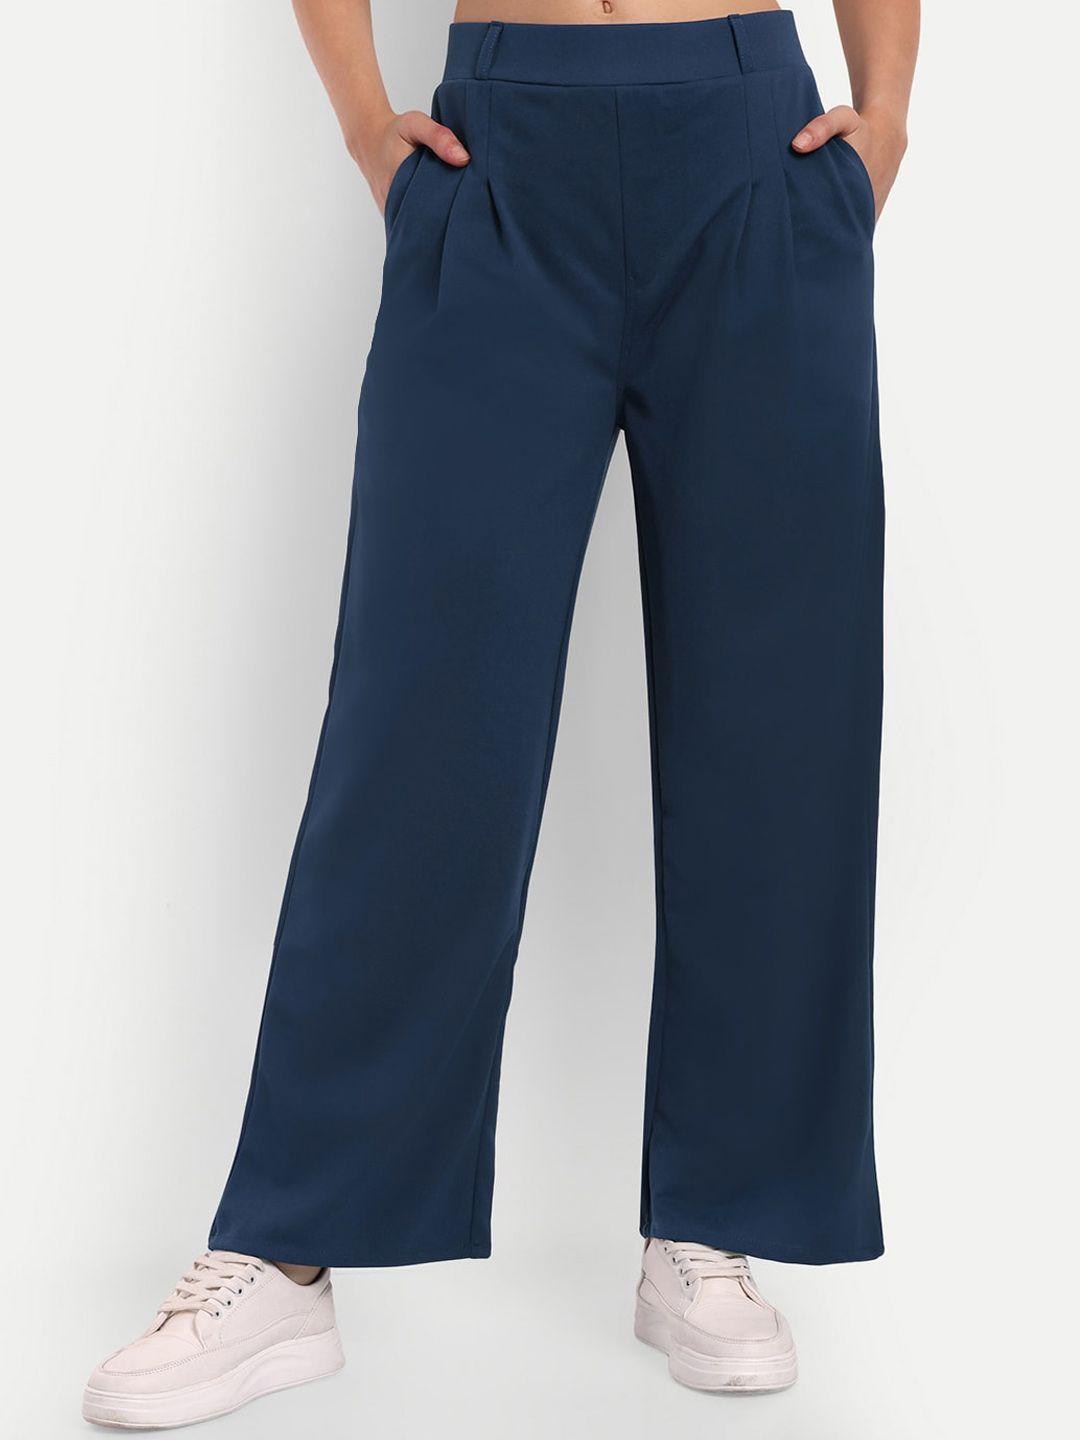 Next One Women Navy Blue Smart Loose Fit High-Rise Easy Wash Pleated Trousers